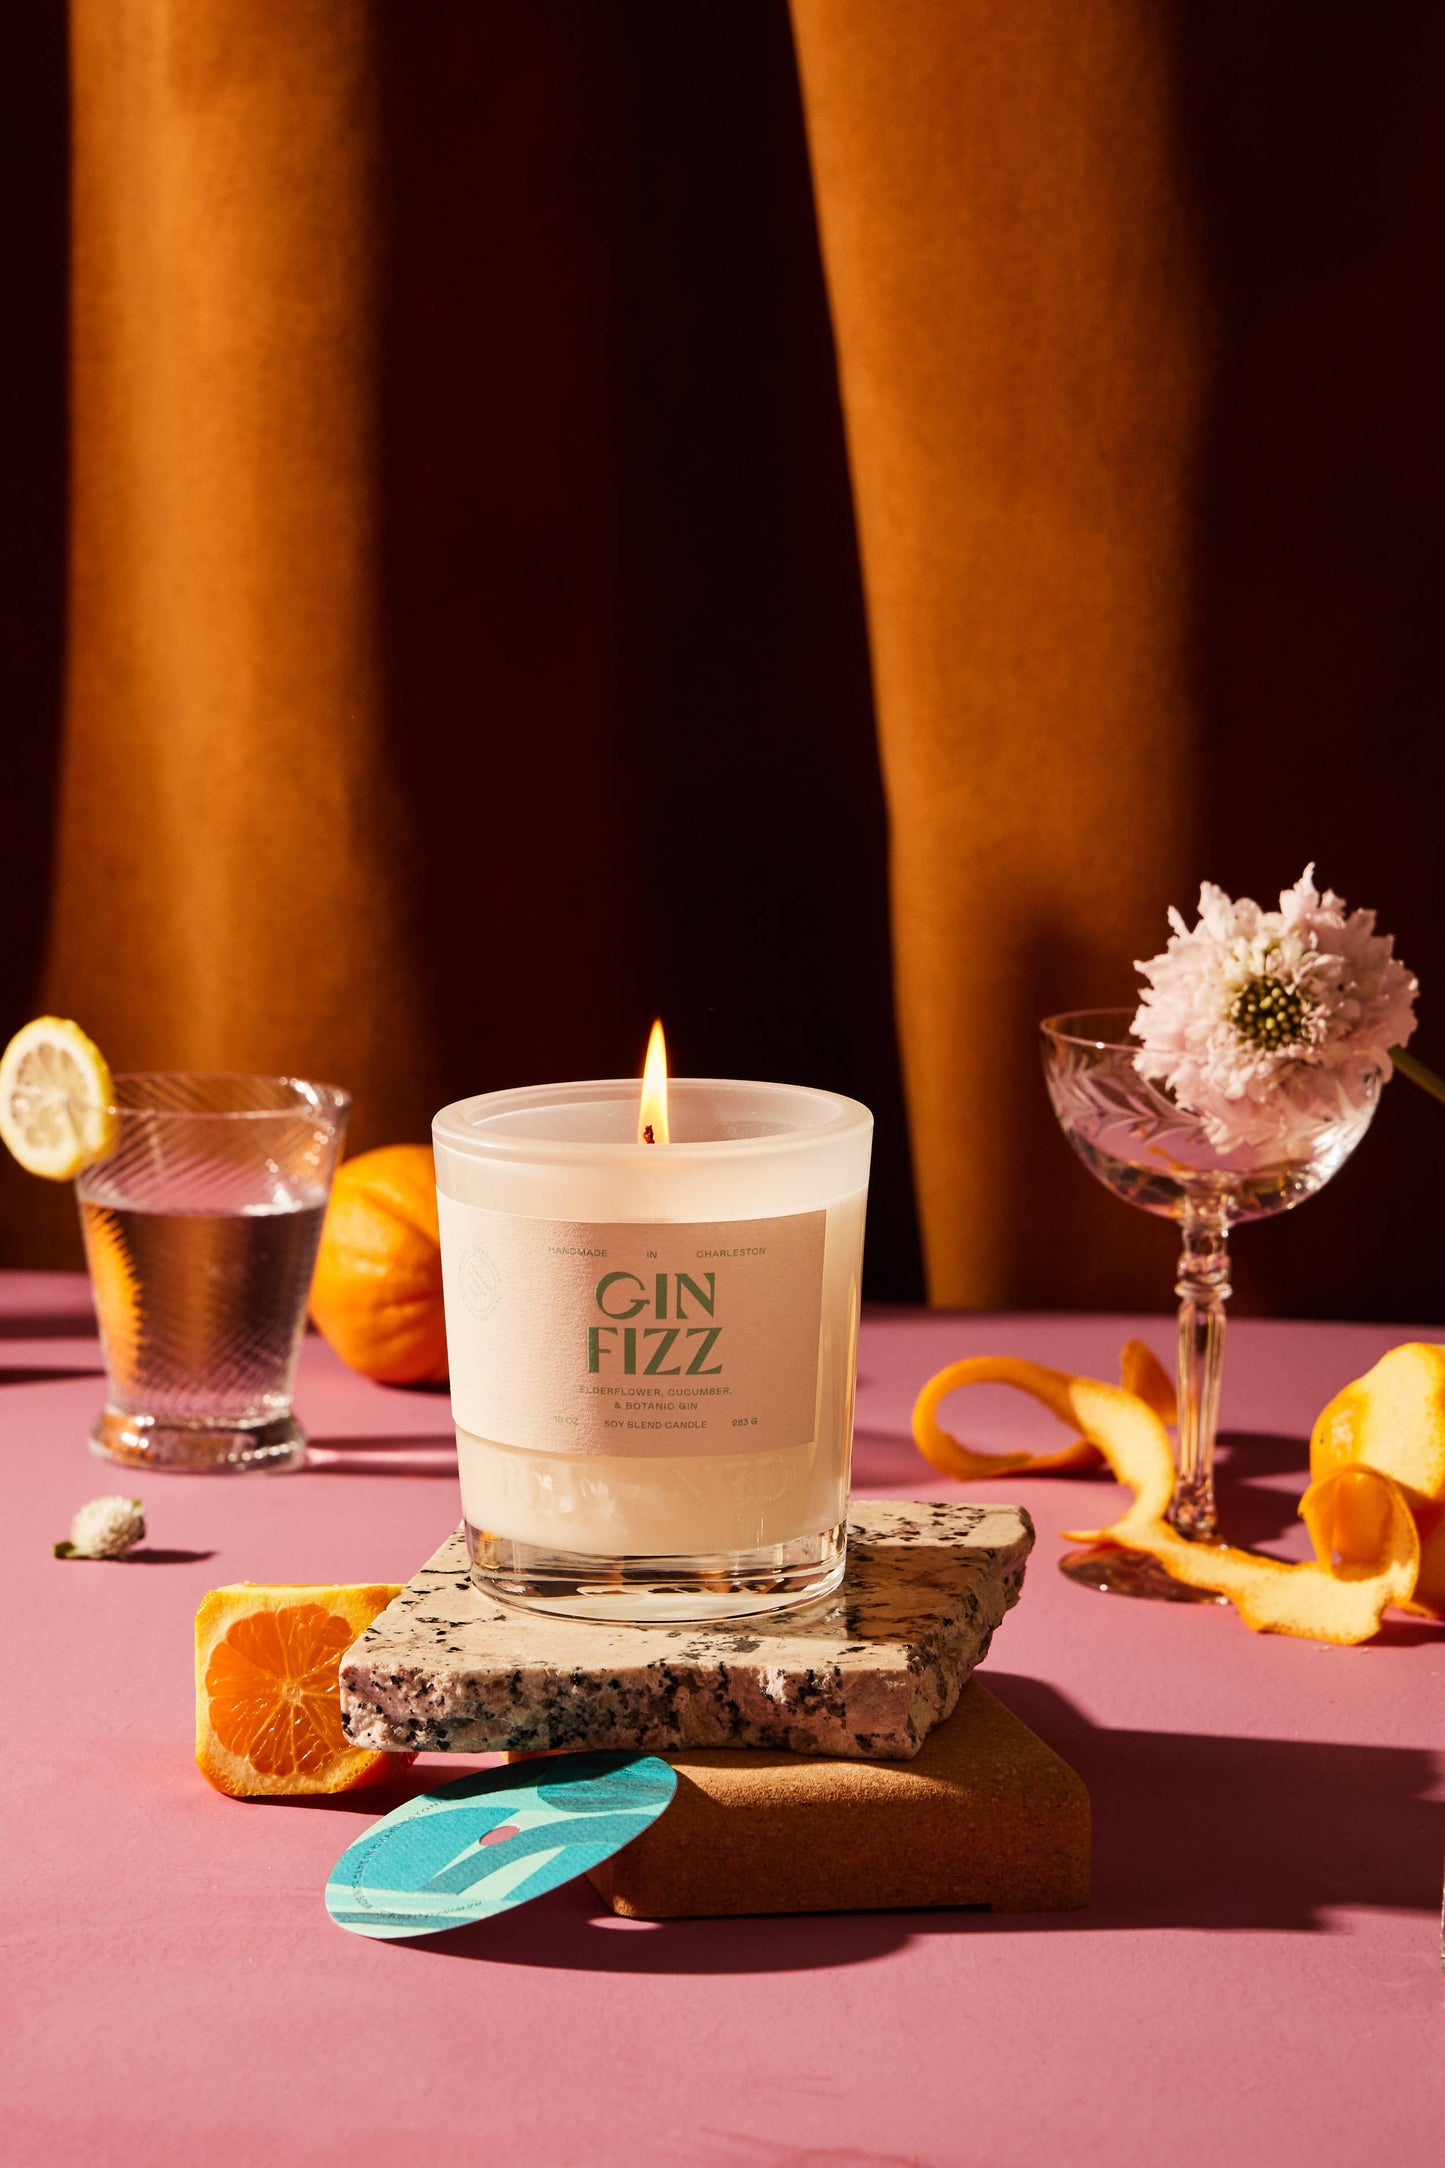 Rewined Gin Fizz Candle 10 oz